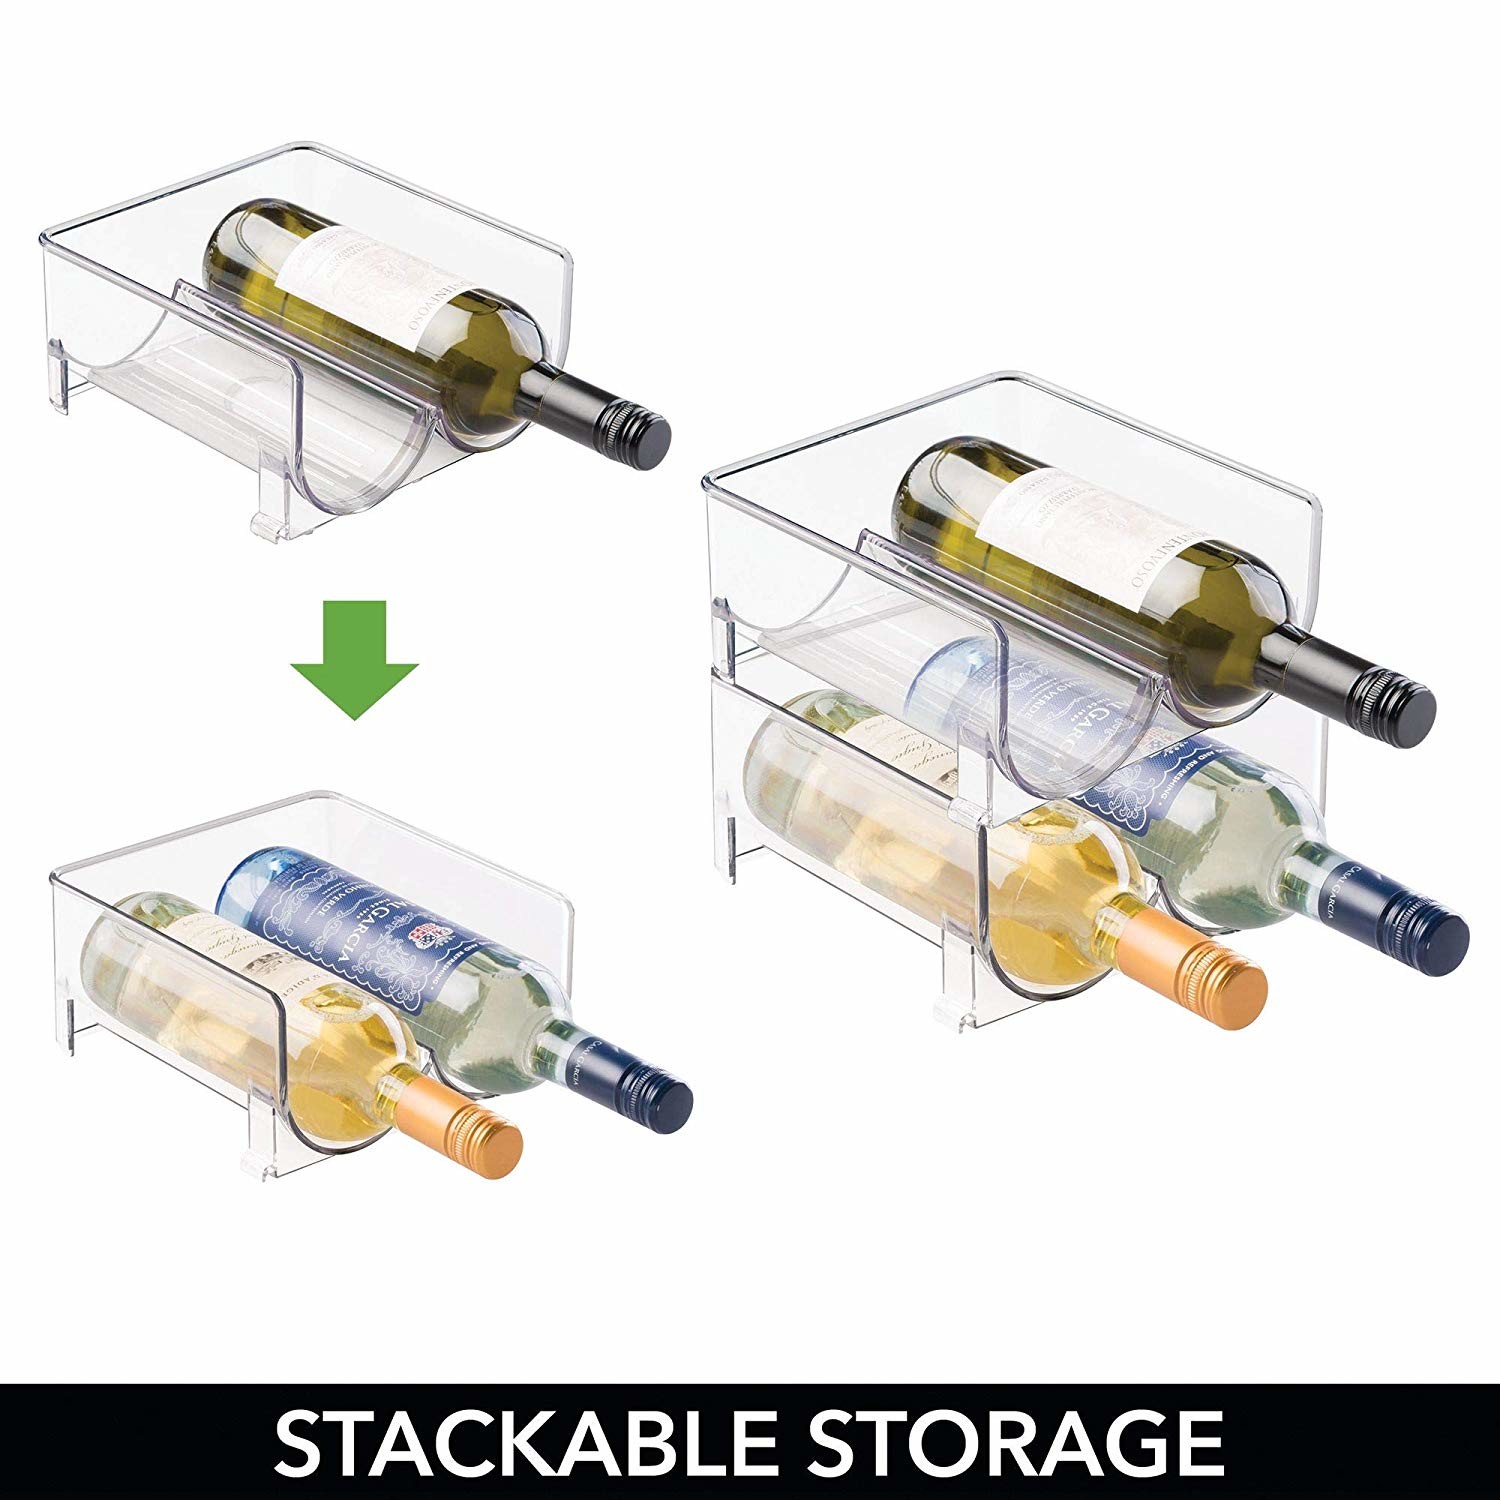  Plastic Acrylic Wine Bottle Holder Impact Resistance For Kitchen Countertops Stackable Manufactures